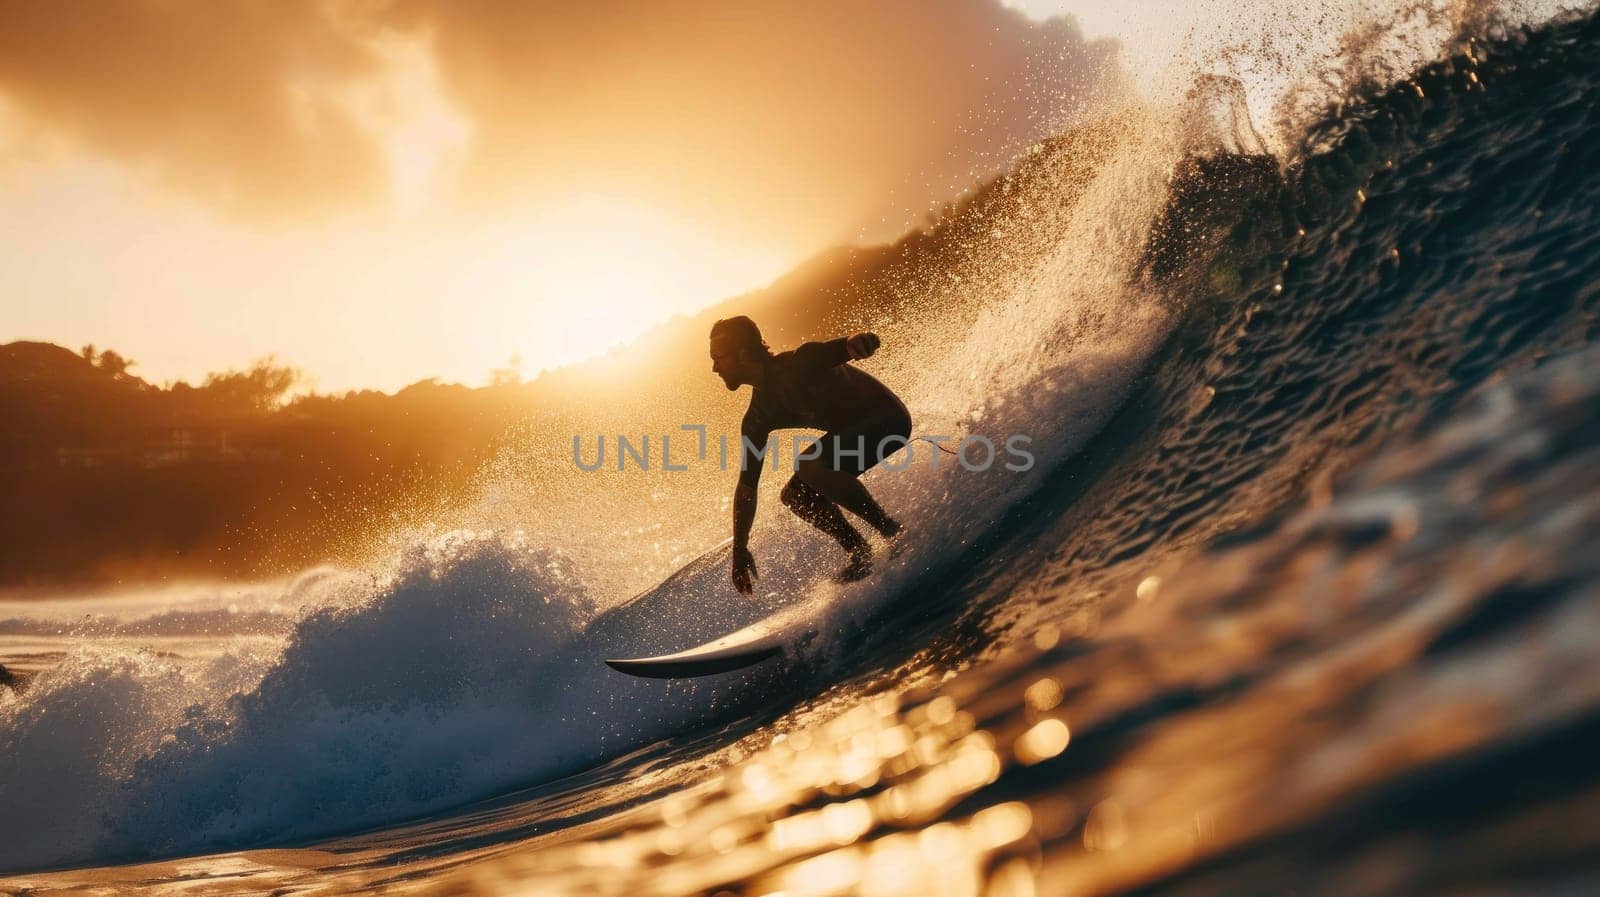 A surfer is riding a wave in the ocean. The sun is setting in the background, casting a warm glow on the water. The surfer is focused on maintaining his balance and riding the wave